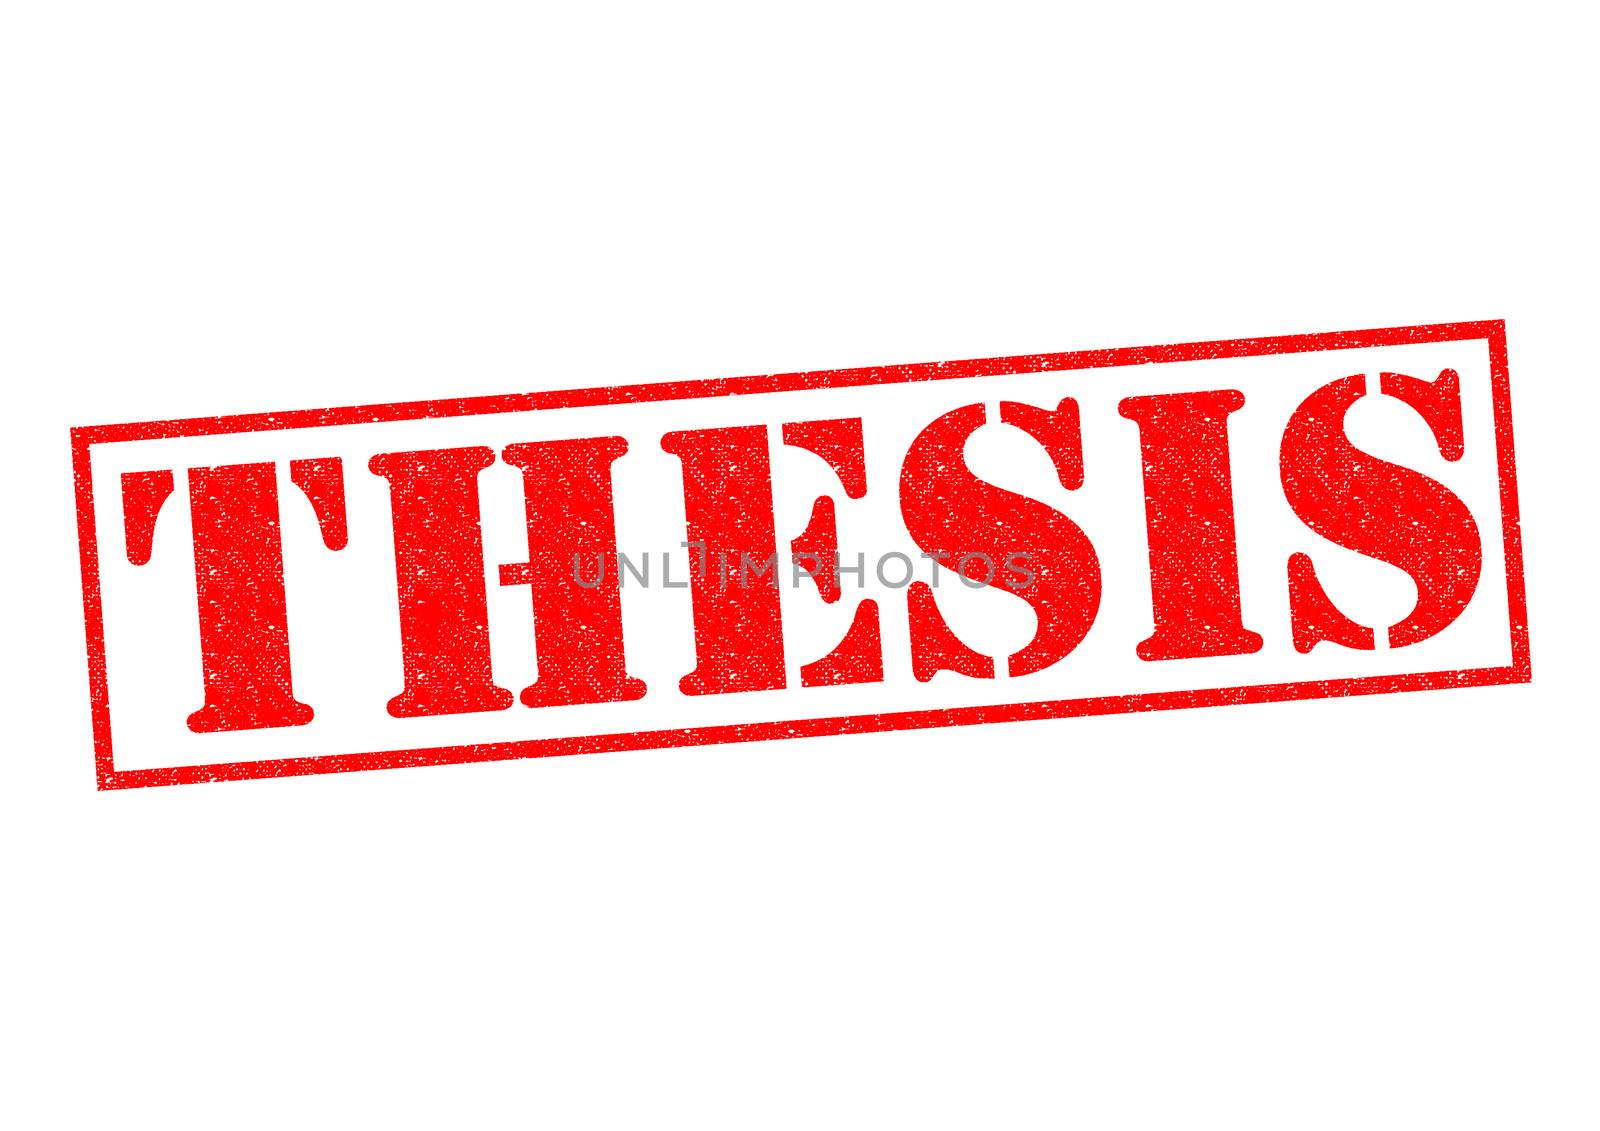 THESIS red Rubber Stamp over a white background.